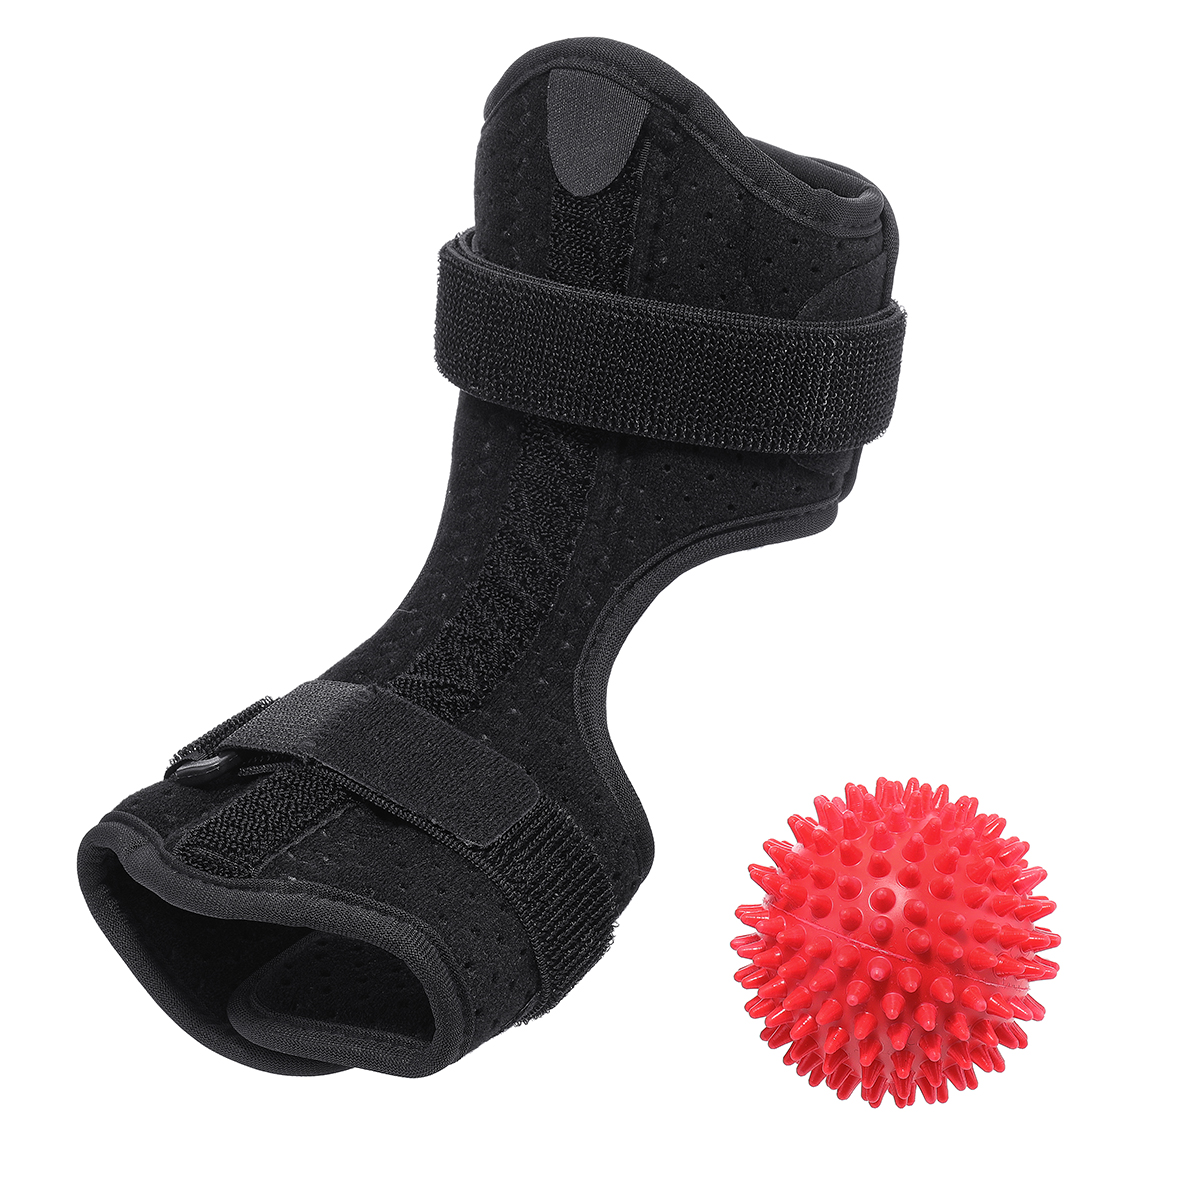 

Plantar Fasciitis Night Splint Drop Foot Orthotic Brace with Hard Spiky Massage Ball for Effective Relief from Achilles Tendonitis Heel Pain Plantar Fascia Drop Foot Bendable Aluminum Strip